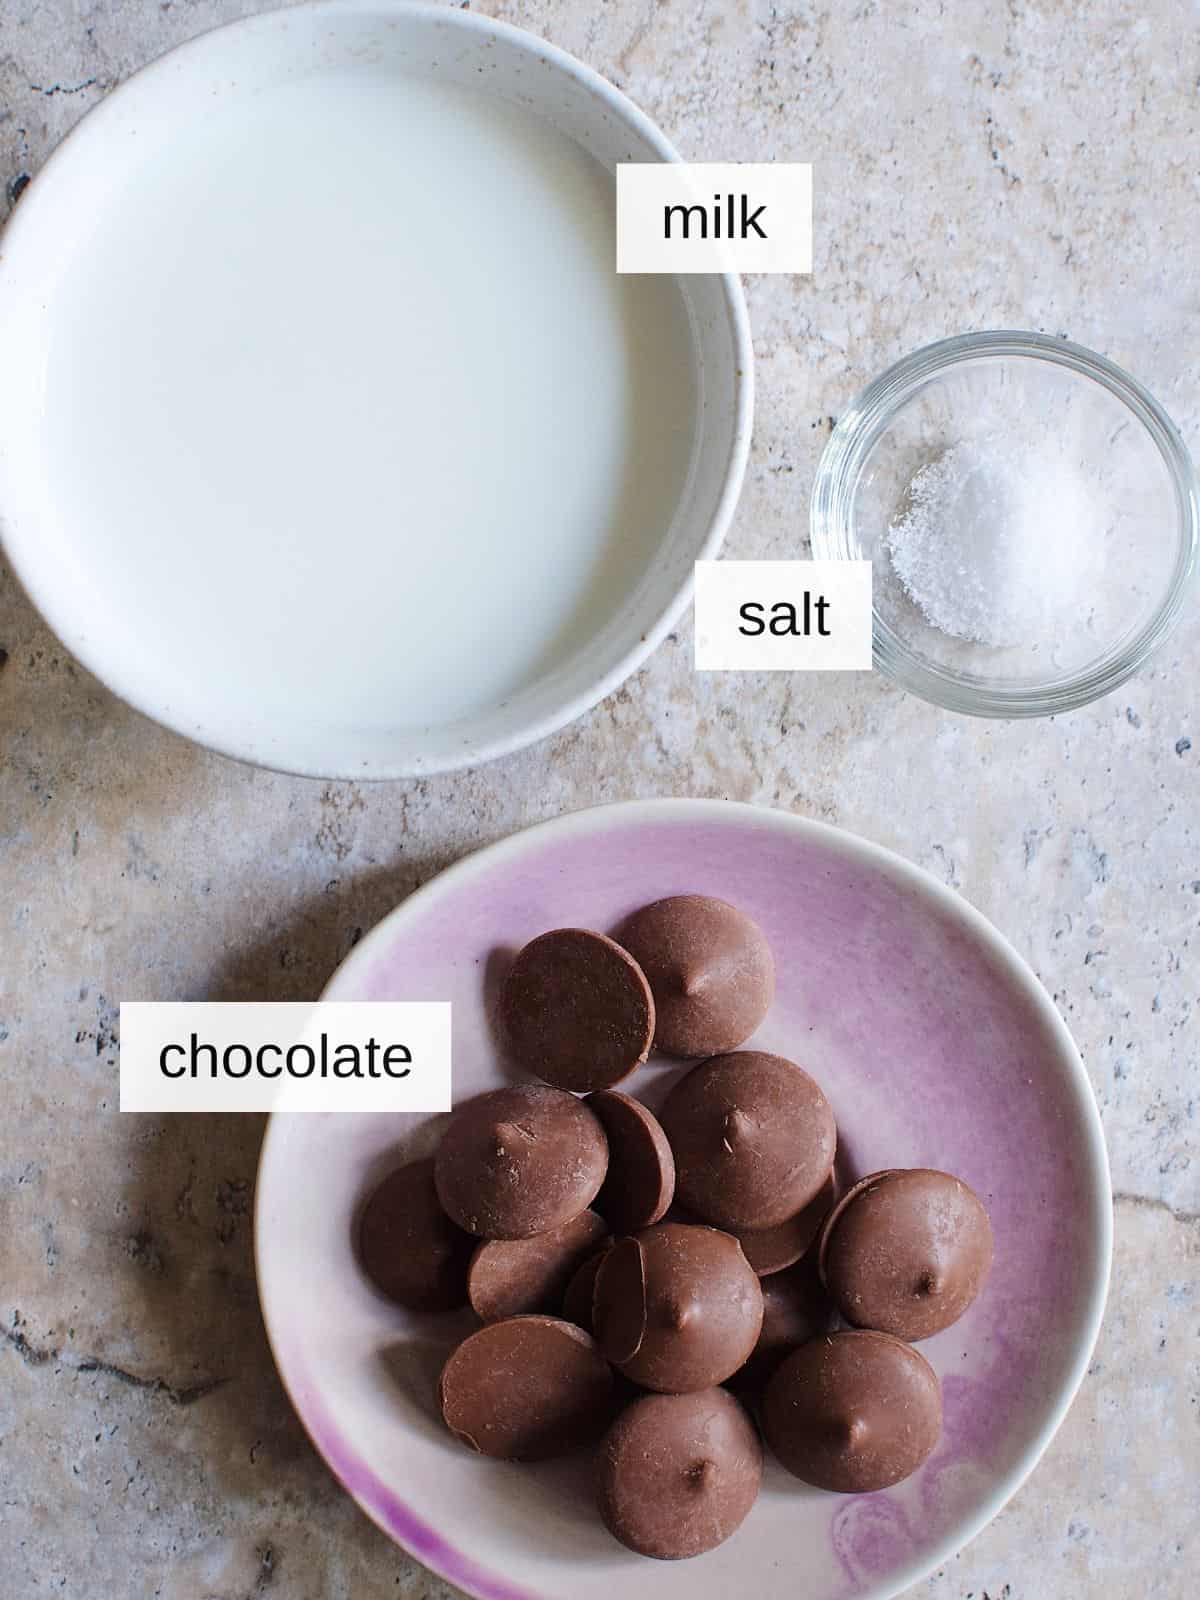 ingredients for hot chocolate recipe without cocoa powder, including milk, chocolates, and salt.